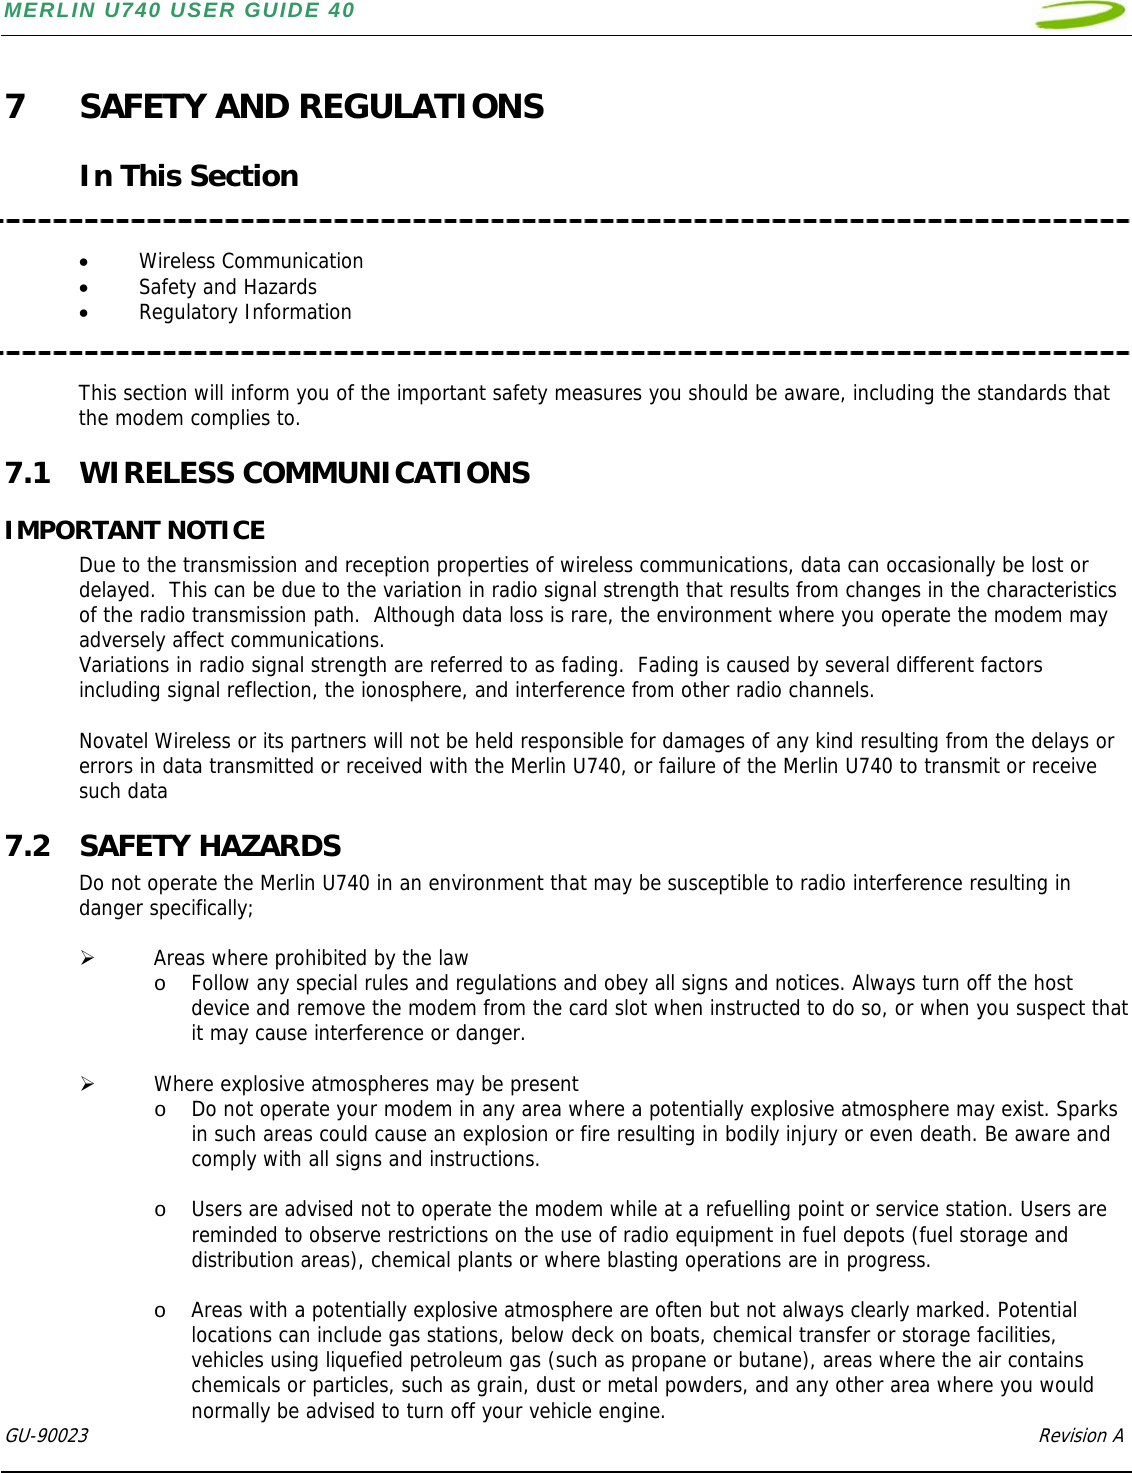 MERLIN U740 USER GUIDE 40  GU-90023            Revision A   7 SAFETY AND REGULATIONS  In This Section   • Wireless Communication • Safety and Hazards • Regulatory Information   This section will inform you of the important safety measures you should be aware, including the standards that the modem complies to. 7.1 WIRELESS COMMUNICATIONS IMPORTANT NOTICE Due to the transmission and reception properties of wireless communications, data can occasionally be lost or delayed.  This can be due to the variation in radio signal strength that results from changes in the characteristics of the radio transmission path.  Although data loss is rare, the environment where you operate the modem may adversely affect communications. Variations in radio signal strength are referred to as fading.  Fading is caused by several different factors including signal reflection, the ionosphere, and interference from other radio channels.   Novatel Wireless or its partners will not be held responsible for damages of any kind resulting from the delays or errors in data transmitted or received with the Merlin U740, or failure of the Merlin U740 to transmit or receive such data 7.2 SAFETY HAZARDS Do not operate the Merlin U740 in an environment that may be susceptible to radio interference resulting in danger specifically;  ¾ Areas where prohibited by the law o Follow any special rules and regulations and obey all signs and notices. Always turn off the host device and remove the modem from the card slot when instructed to do so, or when you suspect that it may cause interference or danger.  ¾ Where explosive atmospheres may be present o Do not operate your modem in any area where a potentially explosive atmosphere may exist. Sparks in such areas could cause an explosion or fire resulting in bodily injury or even death. Be aware and comply with all signs and instructions.  o Users are advised not to operate the modem while at a refuelling point or service station. Users are reminded to observe restrictions on the use of radio equipment in fuel depots (fuel storage and distribution areas), chemical plants or where blasting operations are in progress.   o Areas with a potentially explosive atmosphere are often but not always clearly marked. Potential locations can include gas stations, below deck on boats, chemical transfer or storage facilities, vehicles using liquefied petroleum gas (such as propane or butane), areas where the air contains chemicals or particles, such as grain, dust or metal powders, and any other area where you would normally be advised to turn off your vehicle engine. 